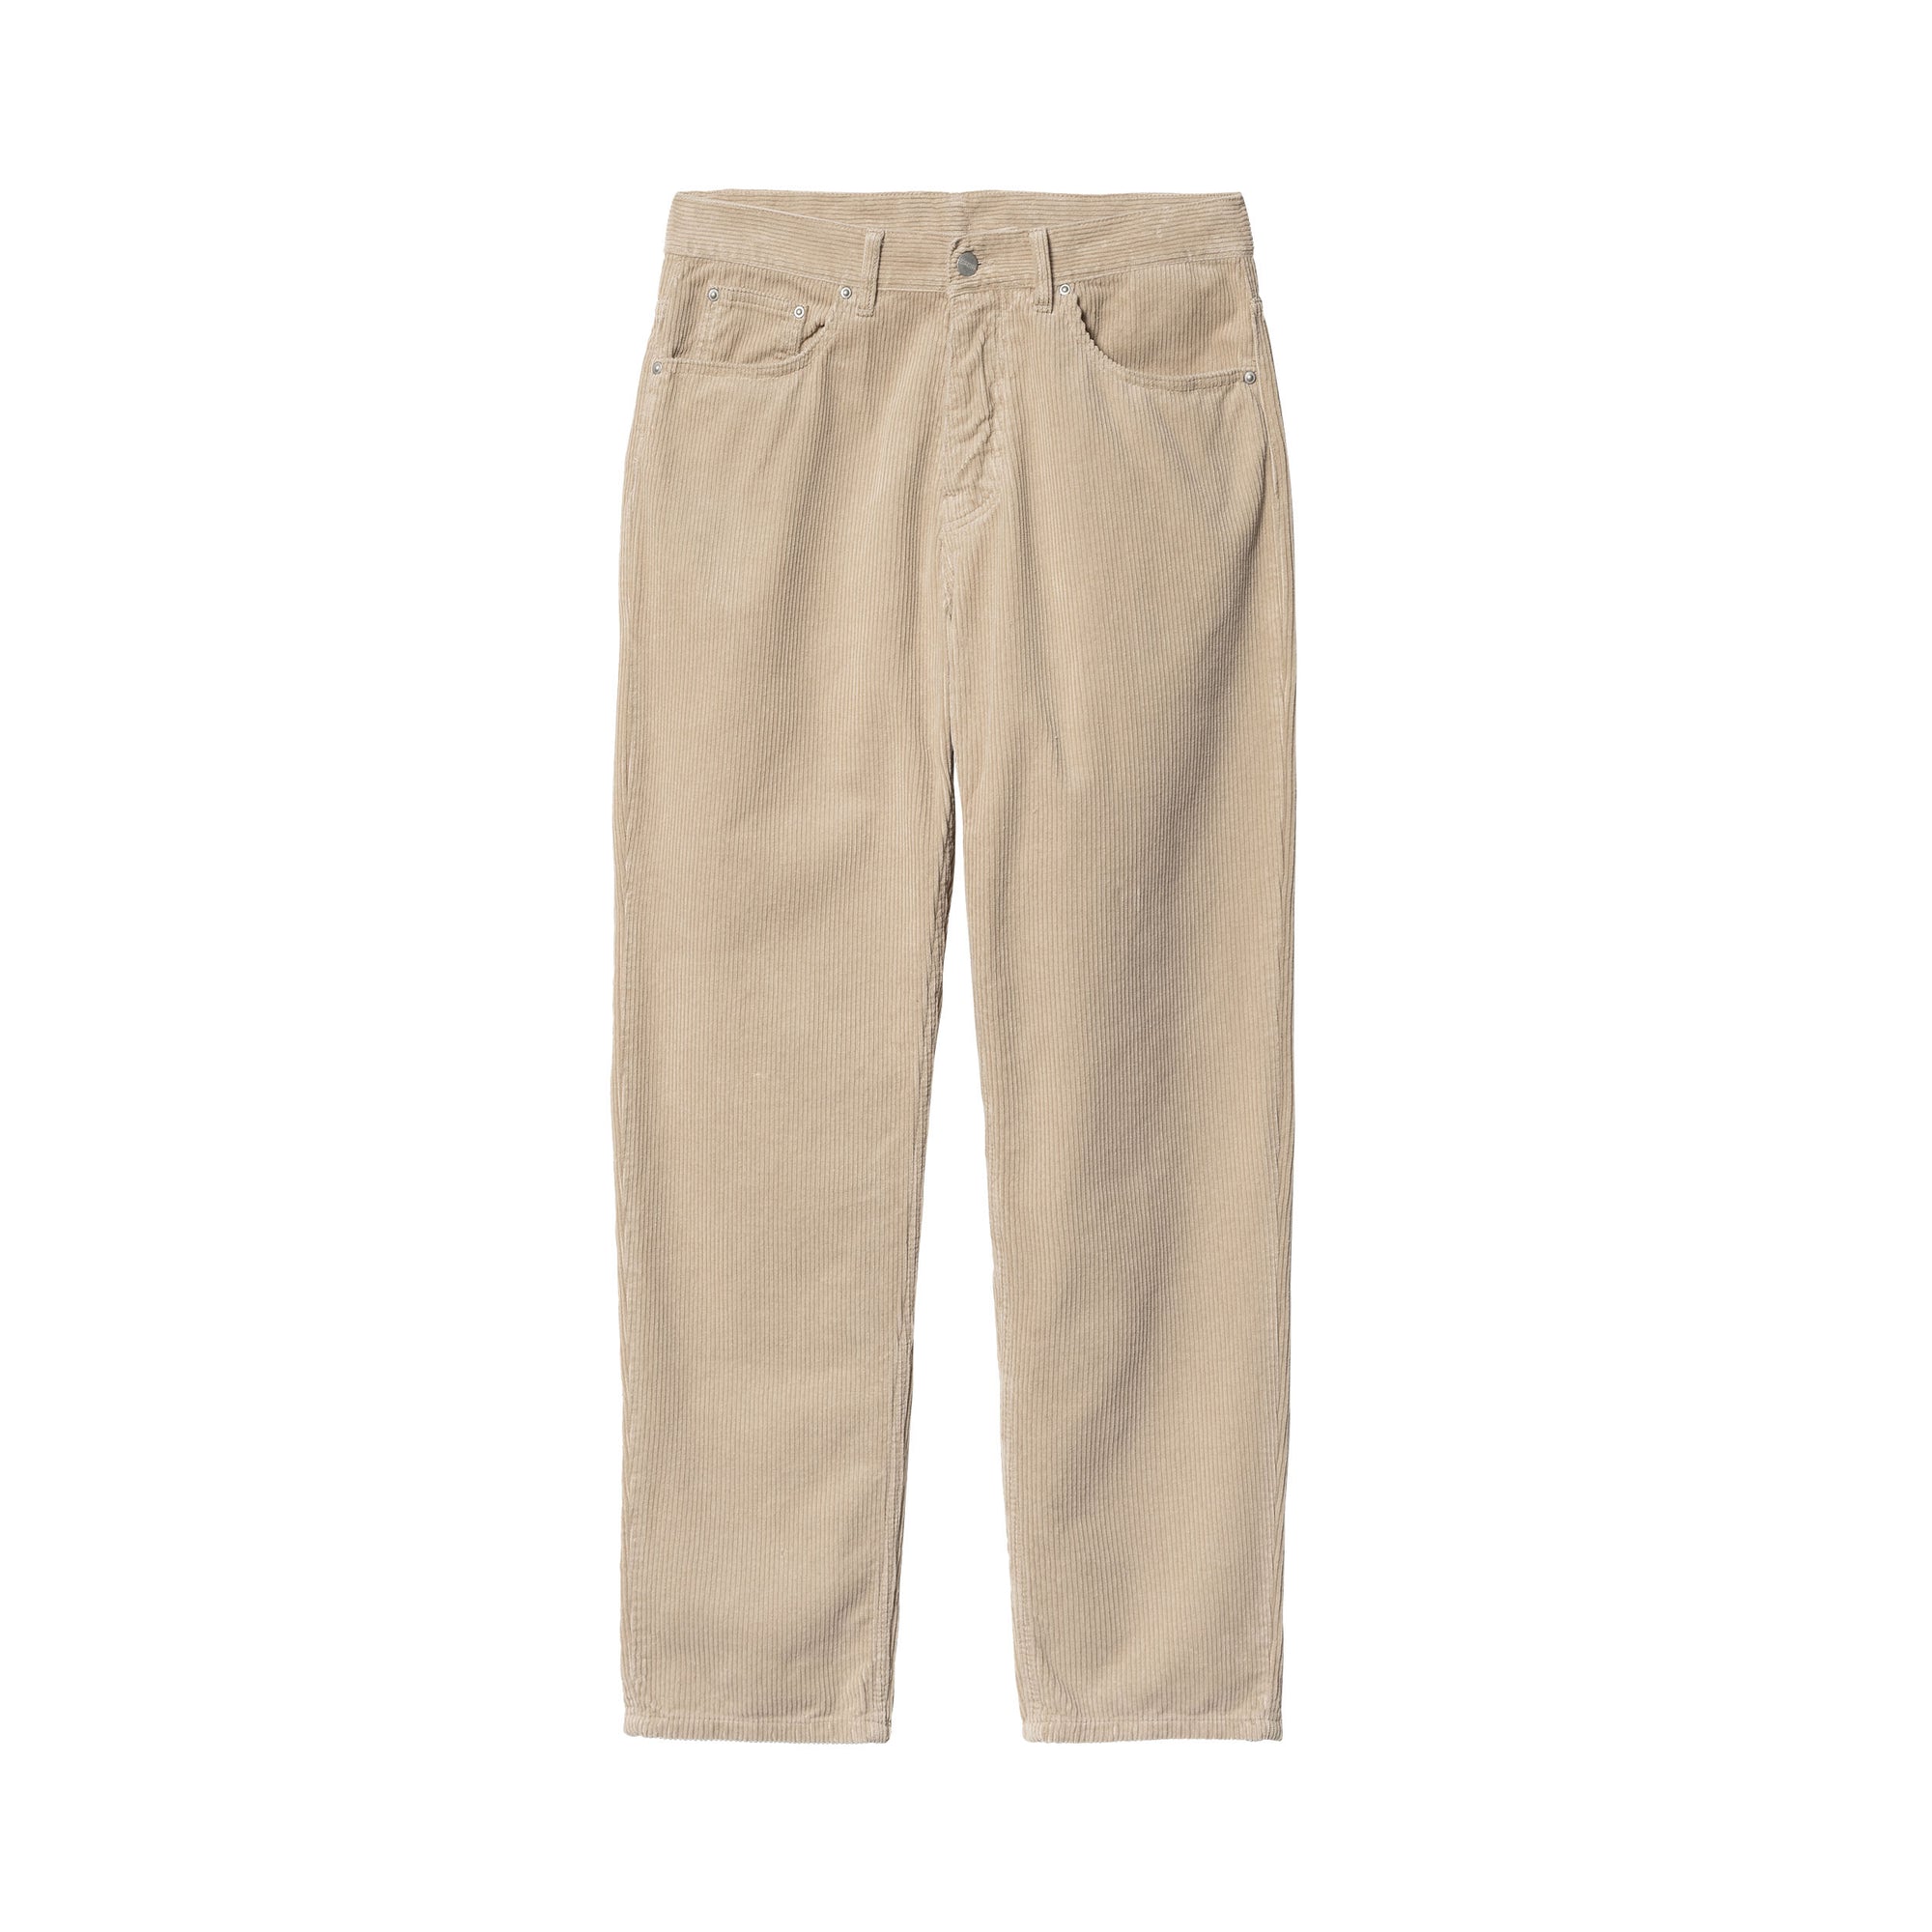 Carhartt WIP Newel Cord Pant (wall rinsed) - Blue Mountain Store